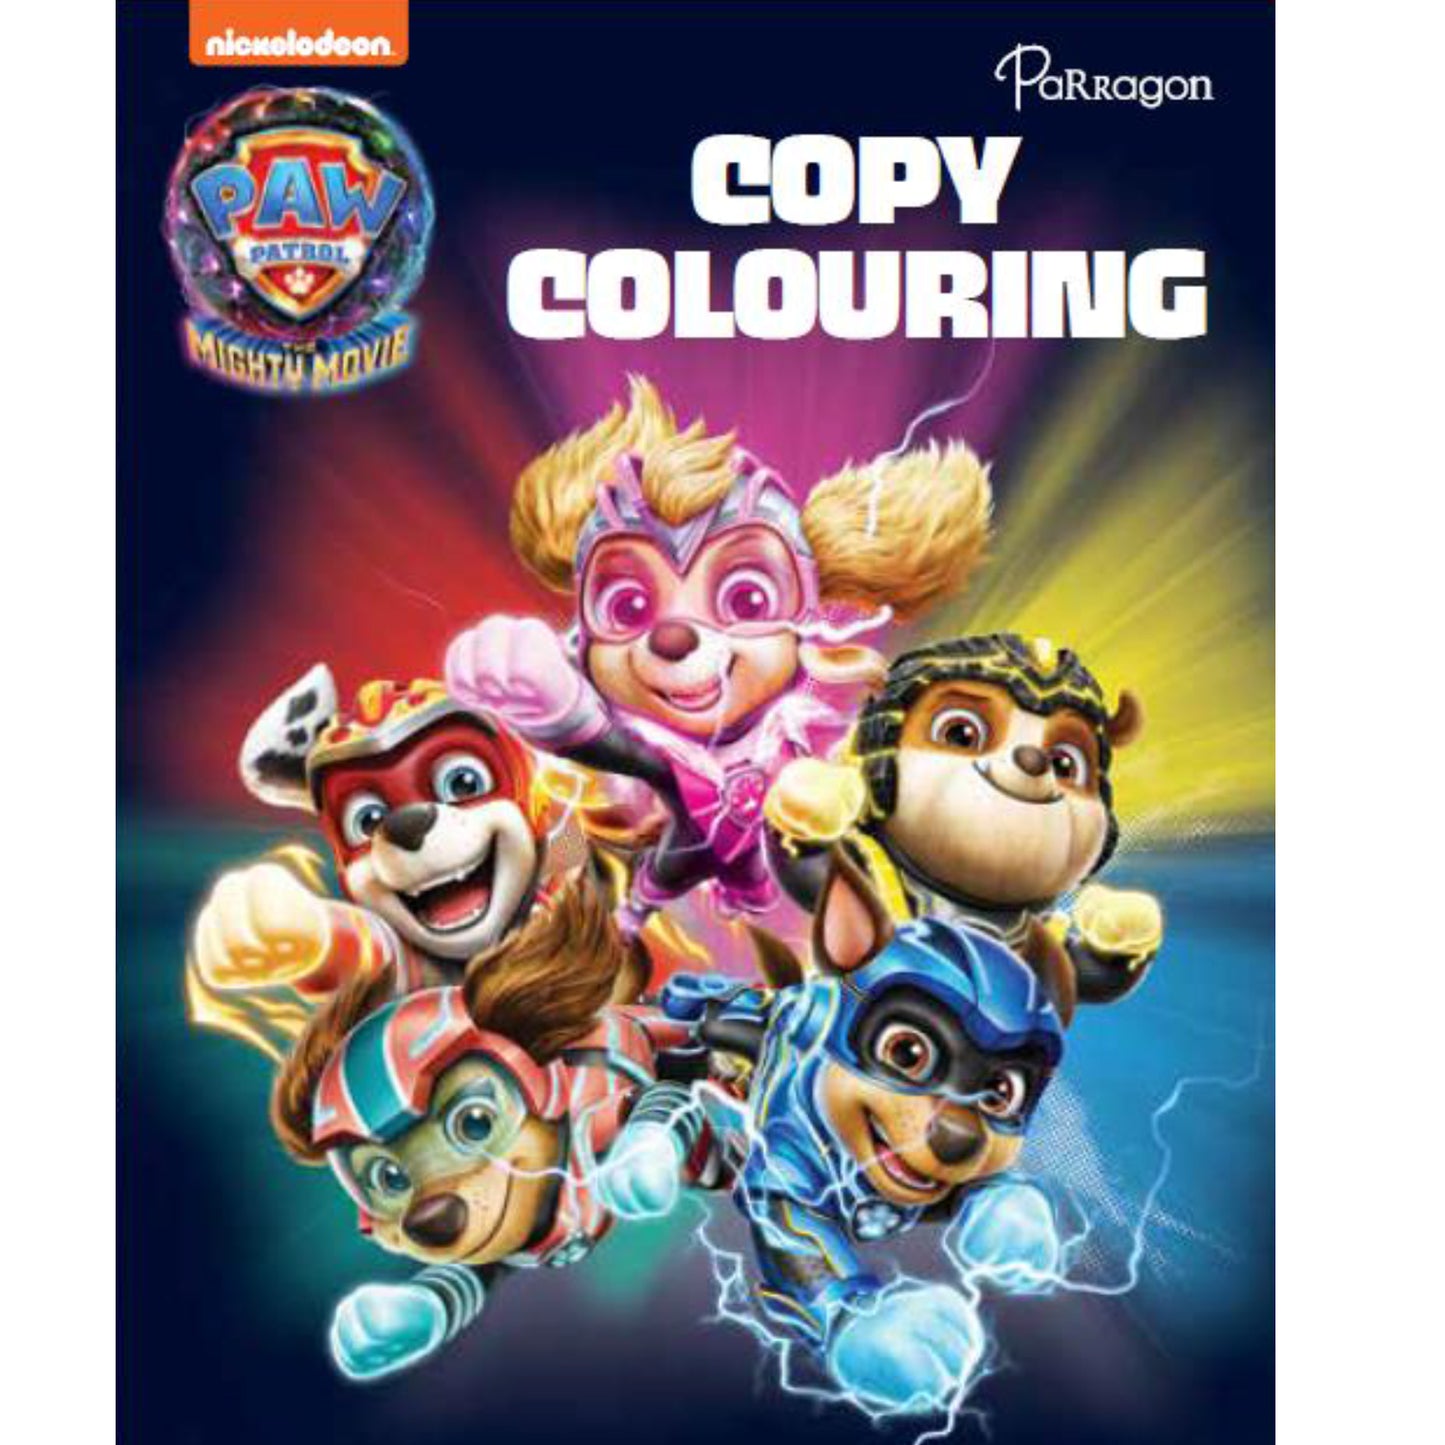 PAW Patrol Copy Colouring | PAW Patrol The Mighty Movie | Colouring books for kids | PAW Patrol new movie books